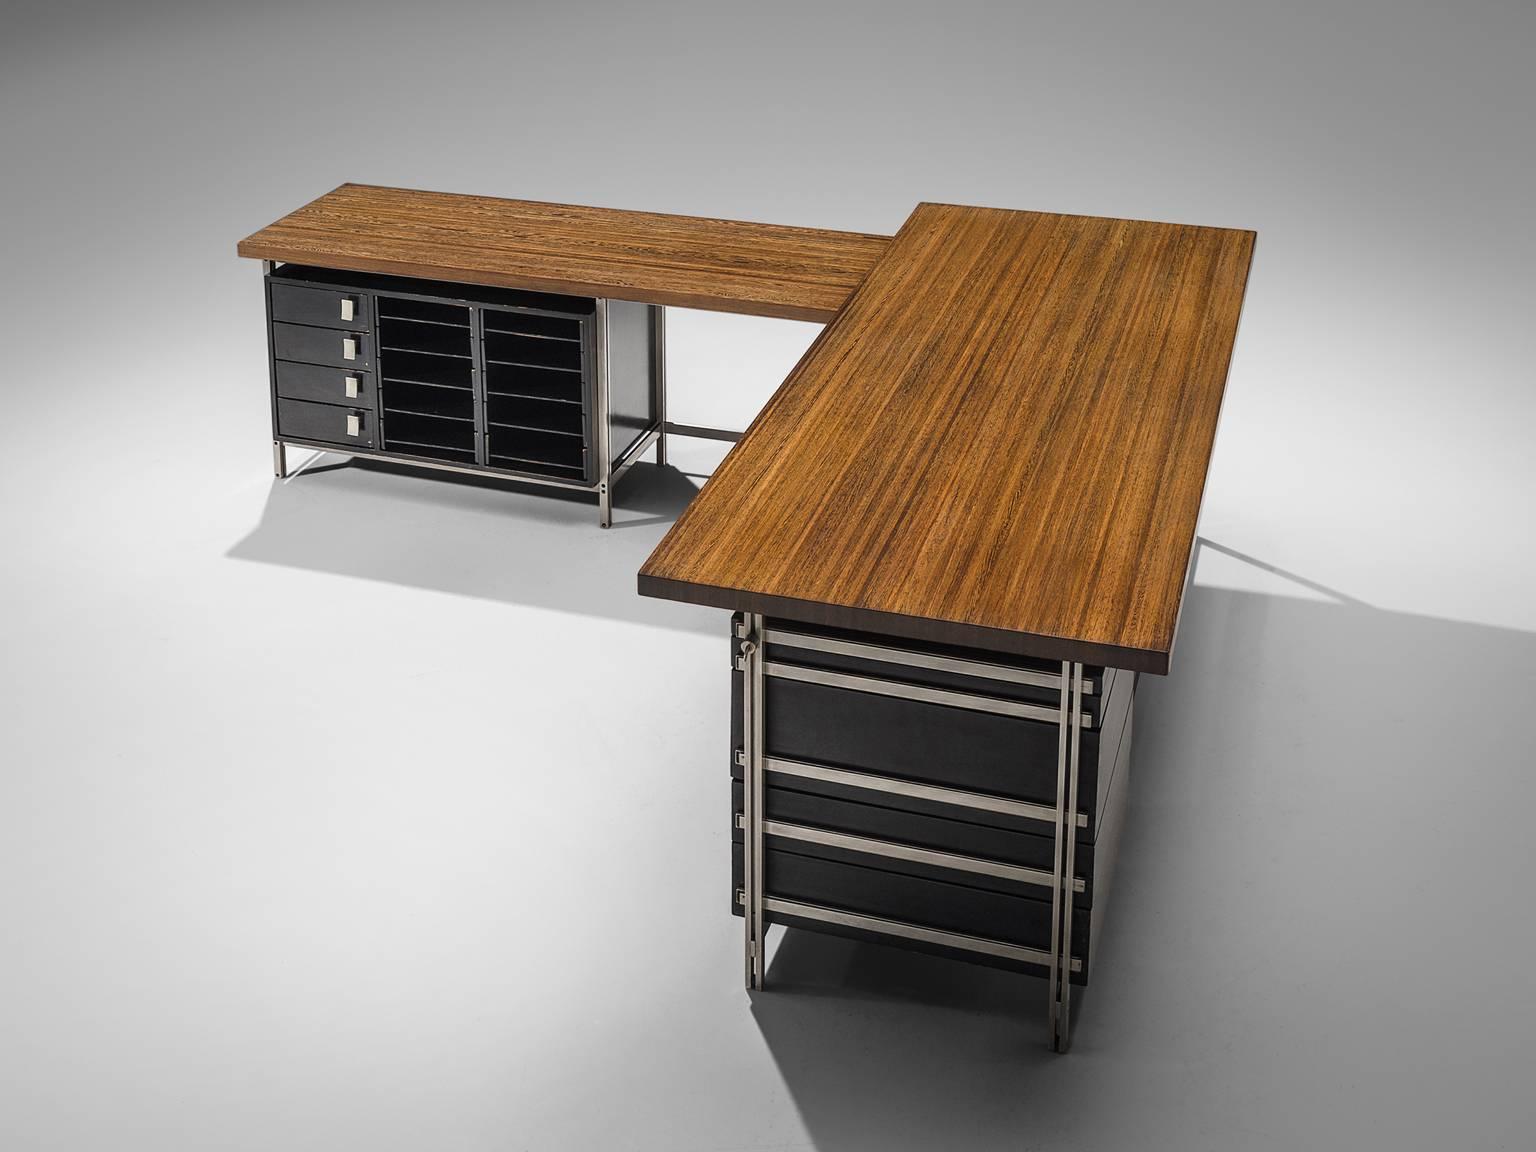 Jules Wabbes, writing desk with drawer pieces, wenge wood tabletop; chrome frame, drawers black, Belgium, 1960s

This corner desk is designed by Jules Wabbes, The table is executed with a solid wenge wooden top, made out of tangentially-sawn wenge